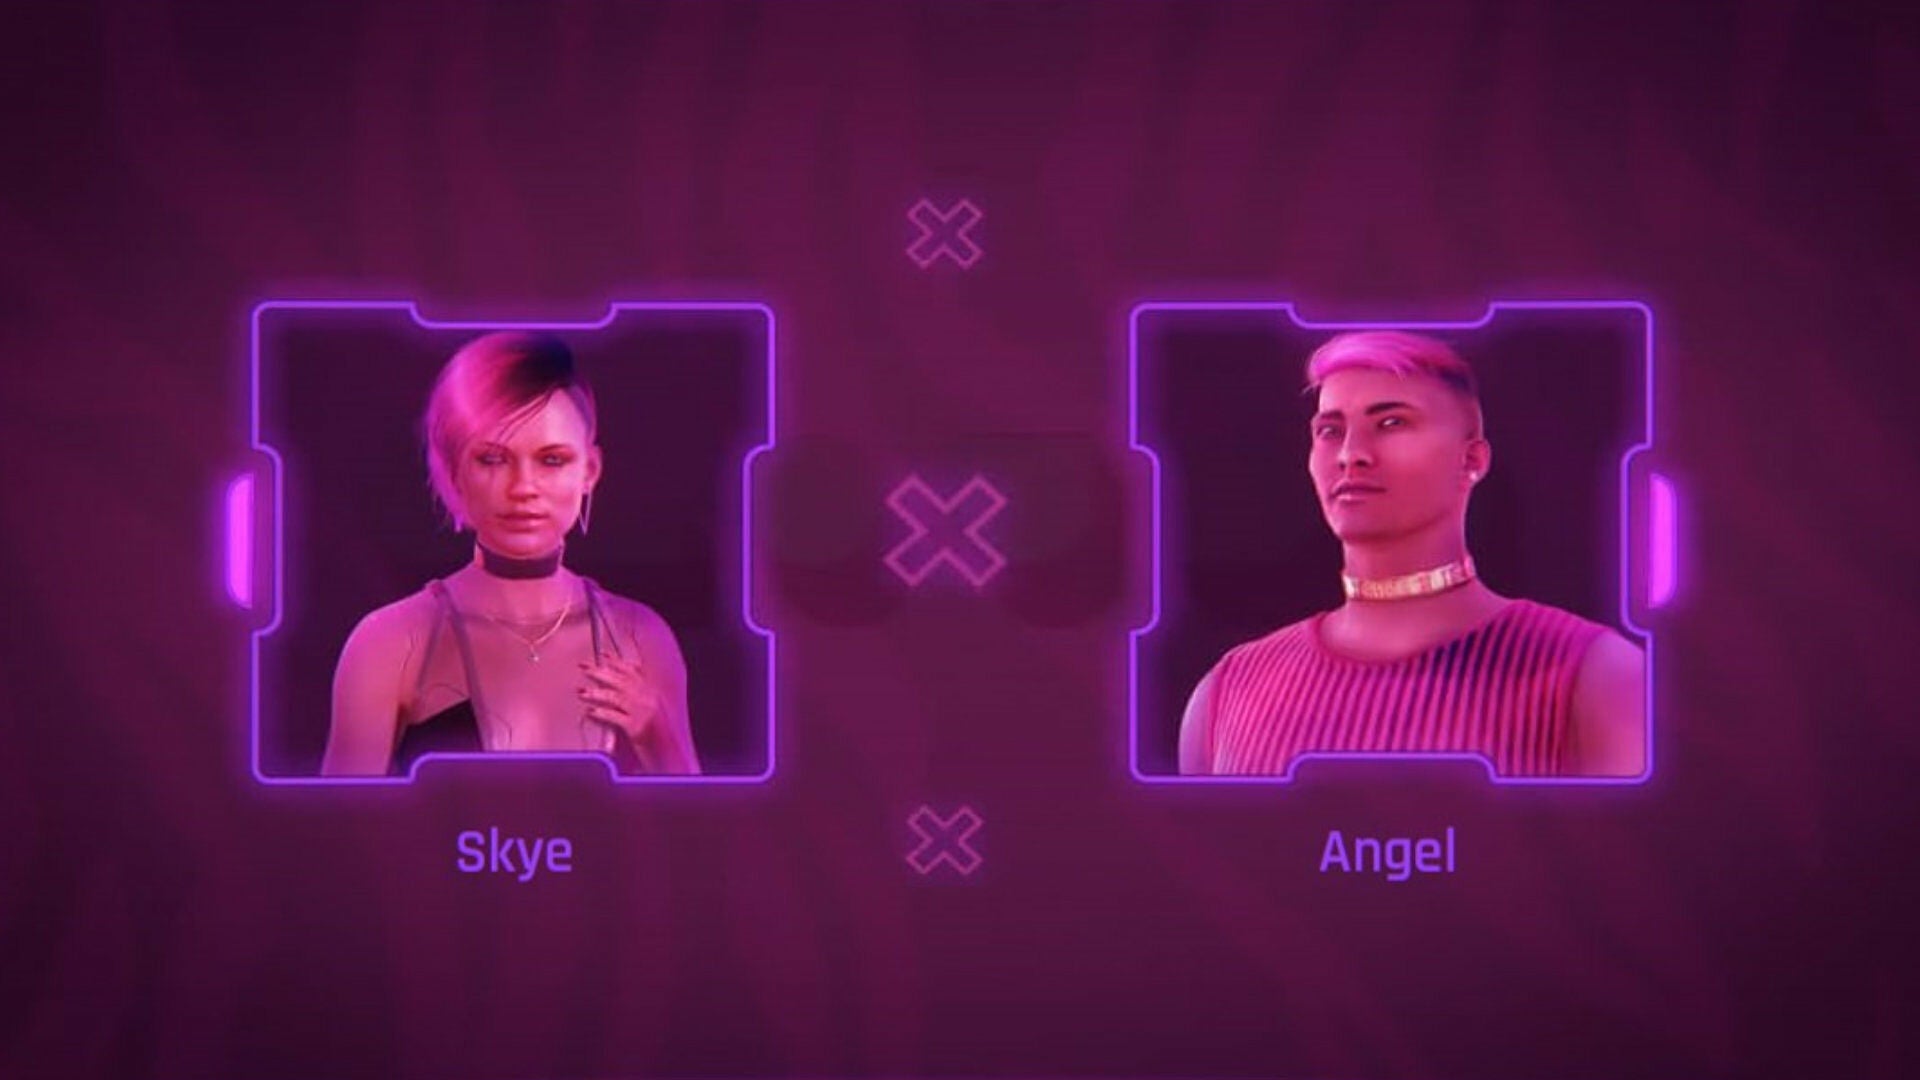 A screen in Cyberpunk 2077 asking you to select between Skye (left) or Angel (right).